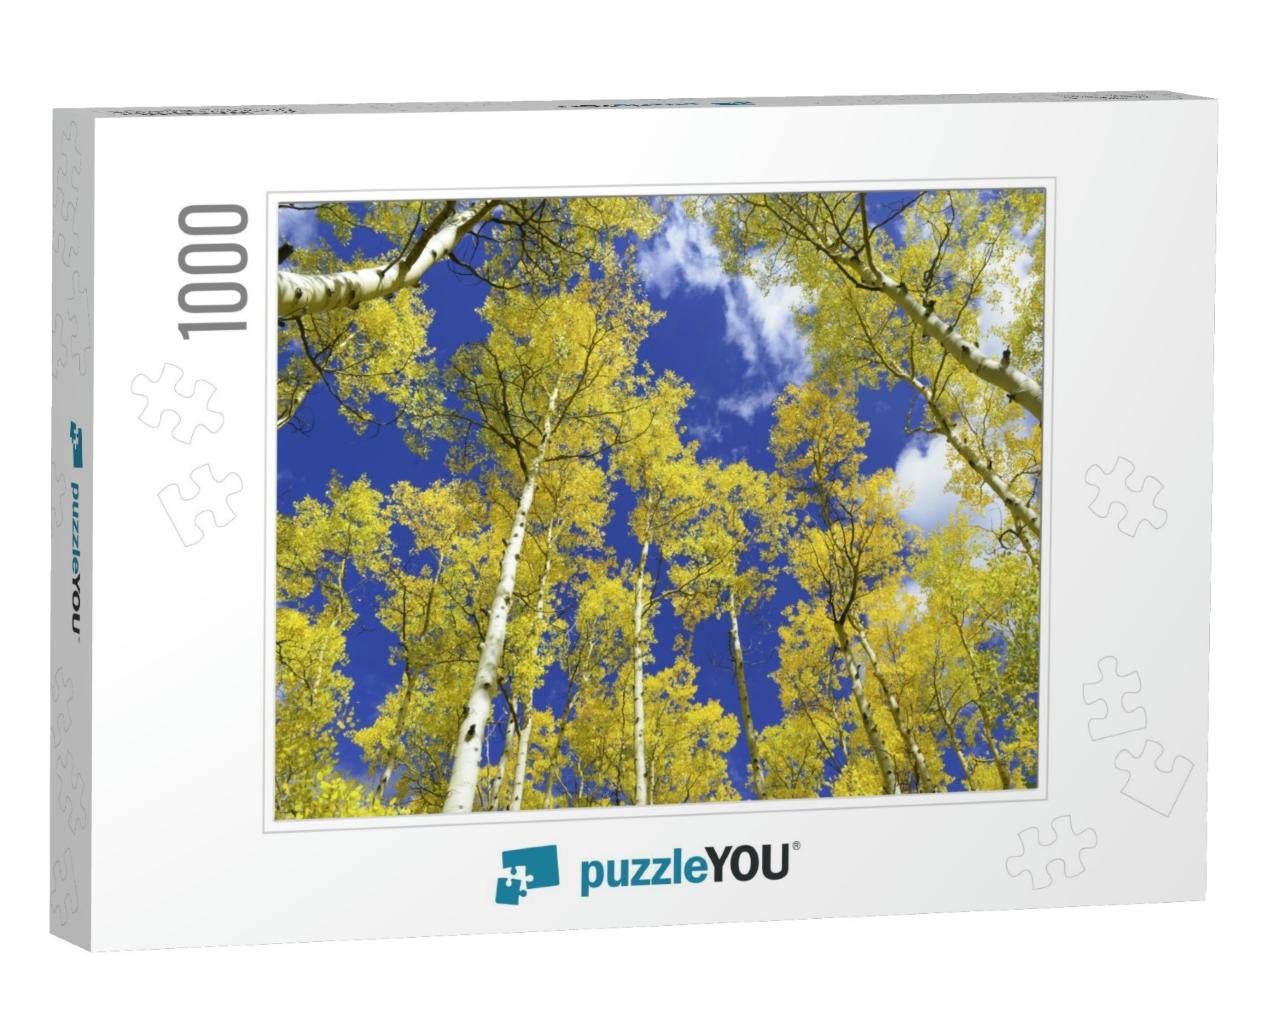 Autumn Foliage - Aspen Trees in Golden Yellow Against Blu... Jigsaw Puzzle with 1000 pieces